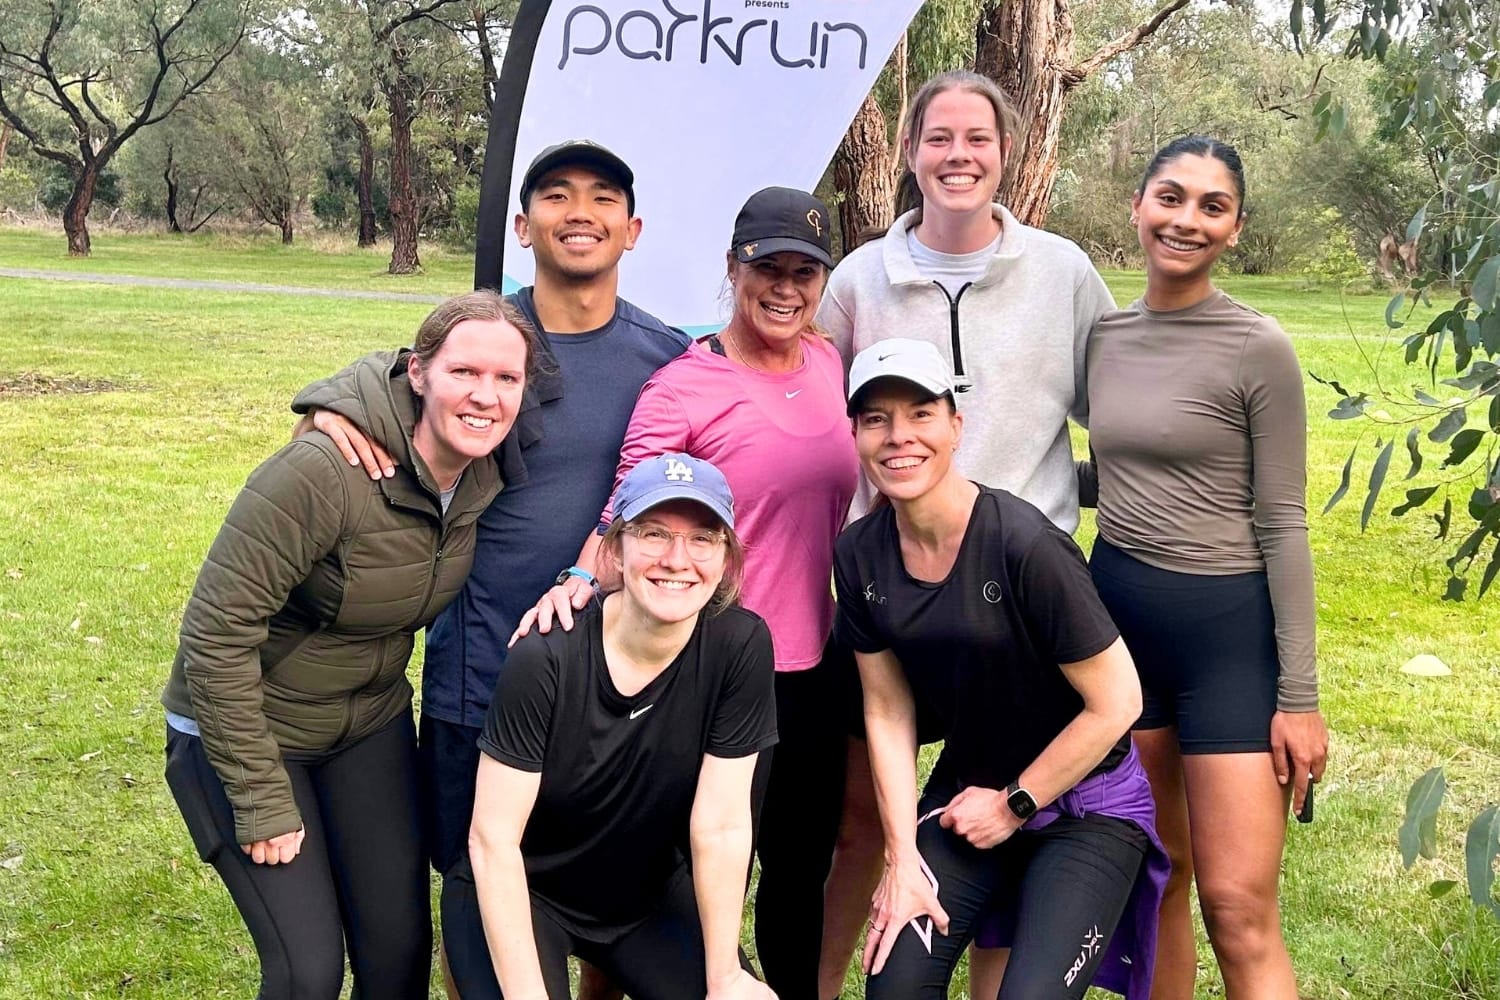 A small group of IRS staff posing for a photo after their participation in parkrun